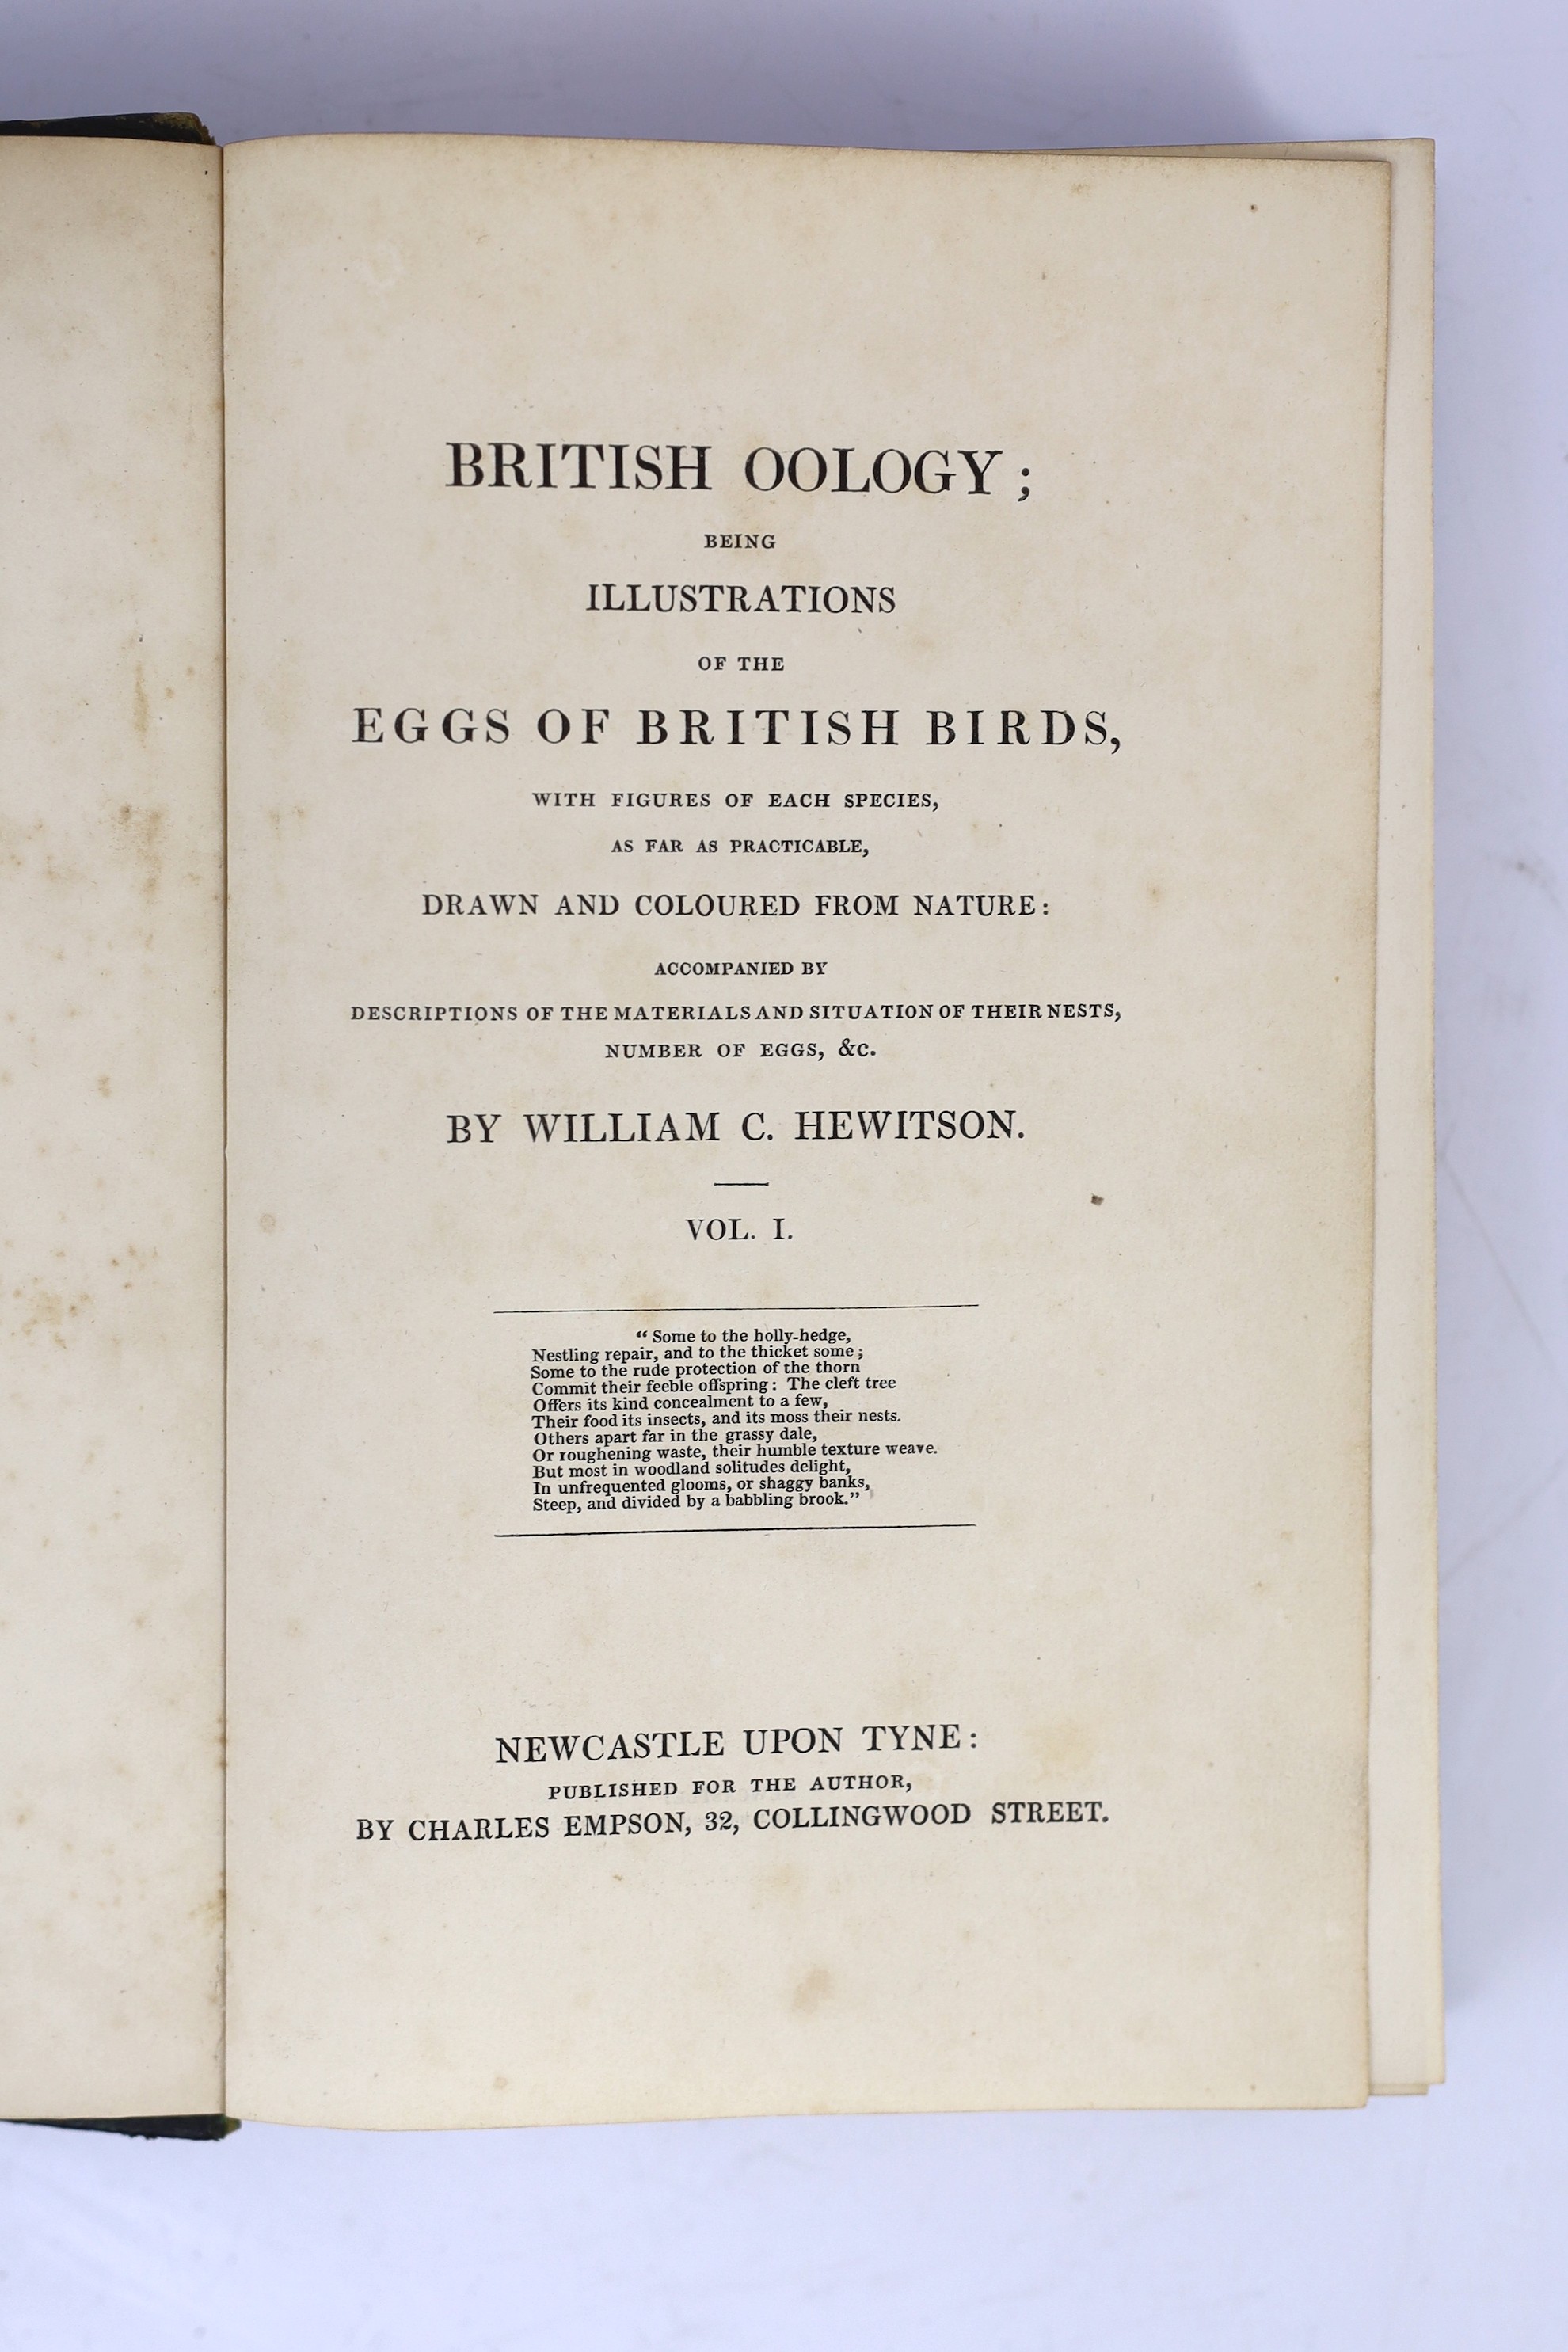 Hewitson, William C. - - British Oology, being Illustrations of the Eggs of British Birds....2 vols. 156 coloured plates (with guards), subscribers list; contemp. green half morocco and marbled boards, gilt decorated pan